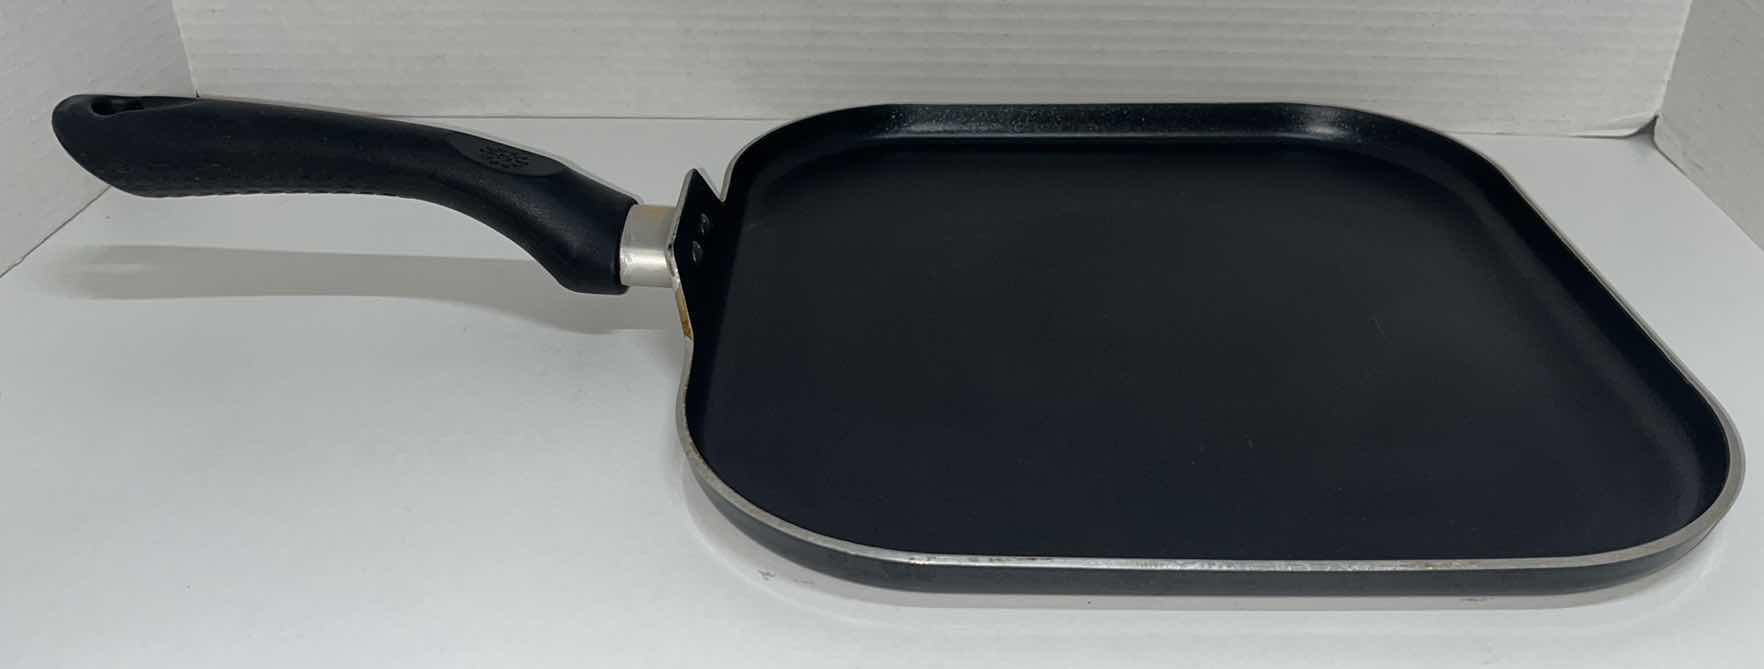 Photo 5 of PAMPERED CHEF 10.5” NON-STICK SQUARE GRILL PAN & ECOLUTION 11” SQUARE NON-STICK FLAT GRIDDLE PAN